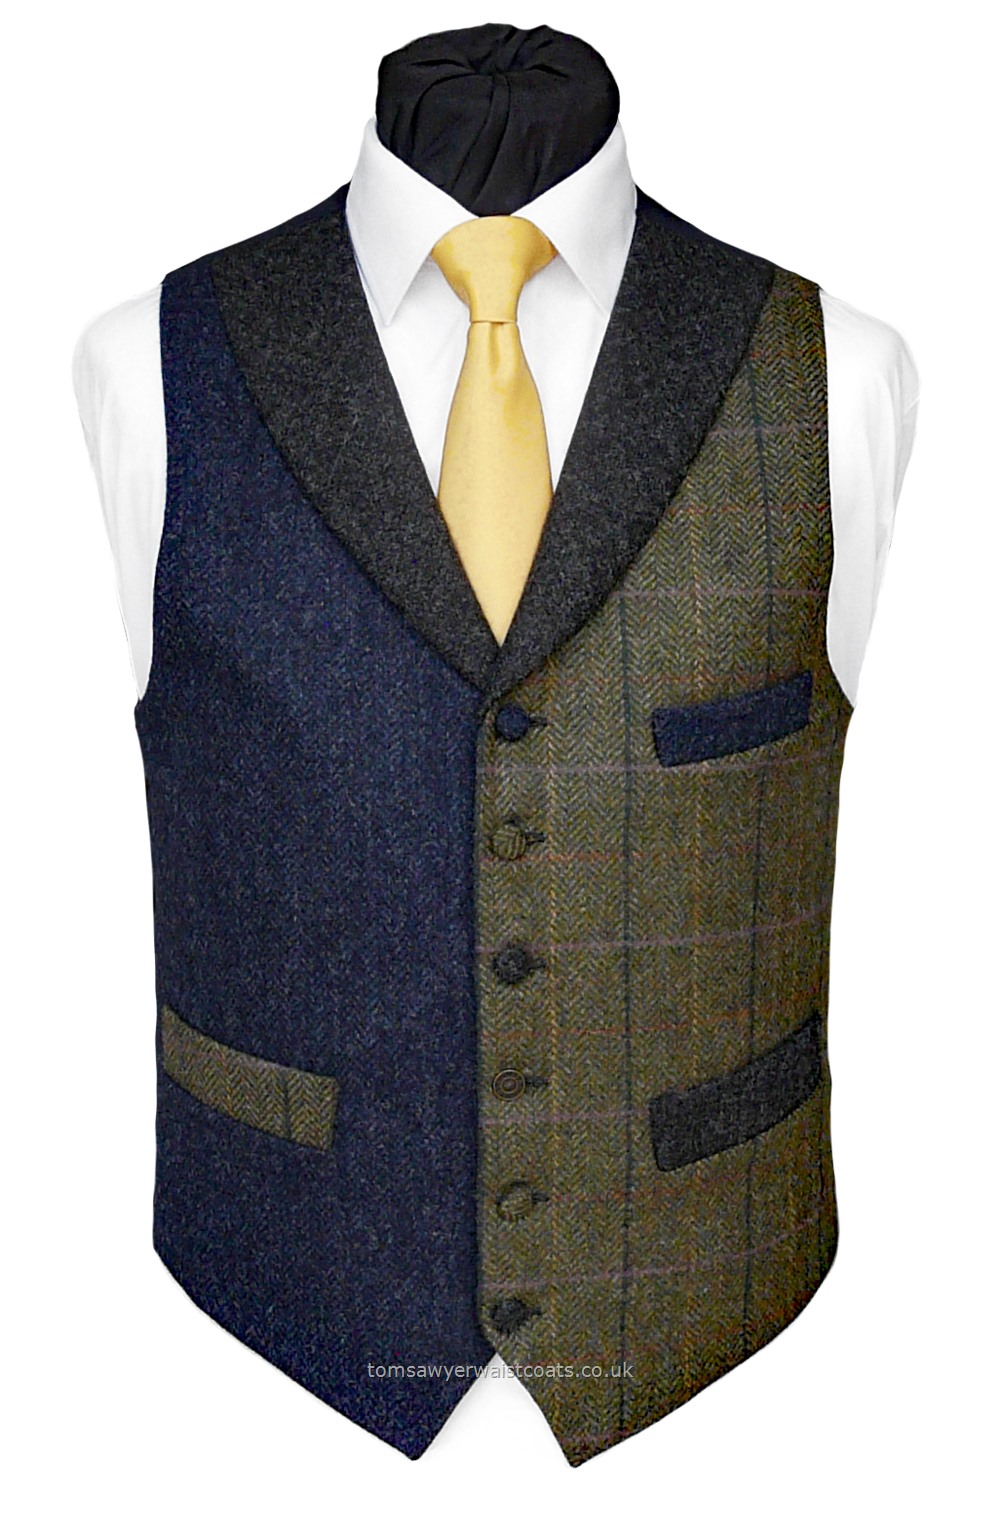 Traditional Waistcoats : "The Totnes Collection" waistcoats : 'Hambledown Tor' Totnes Collection Waistcoat.